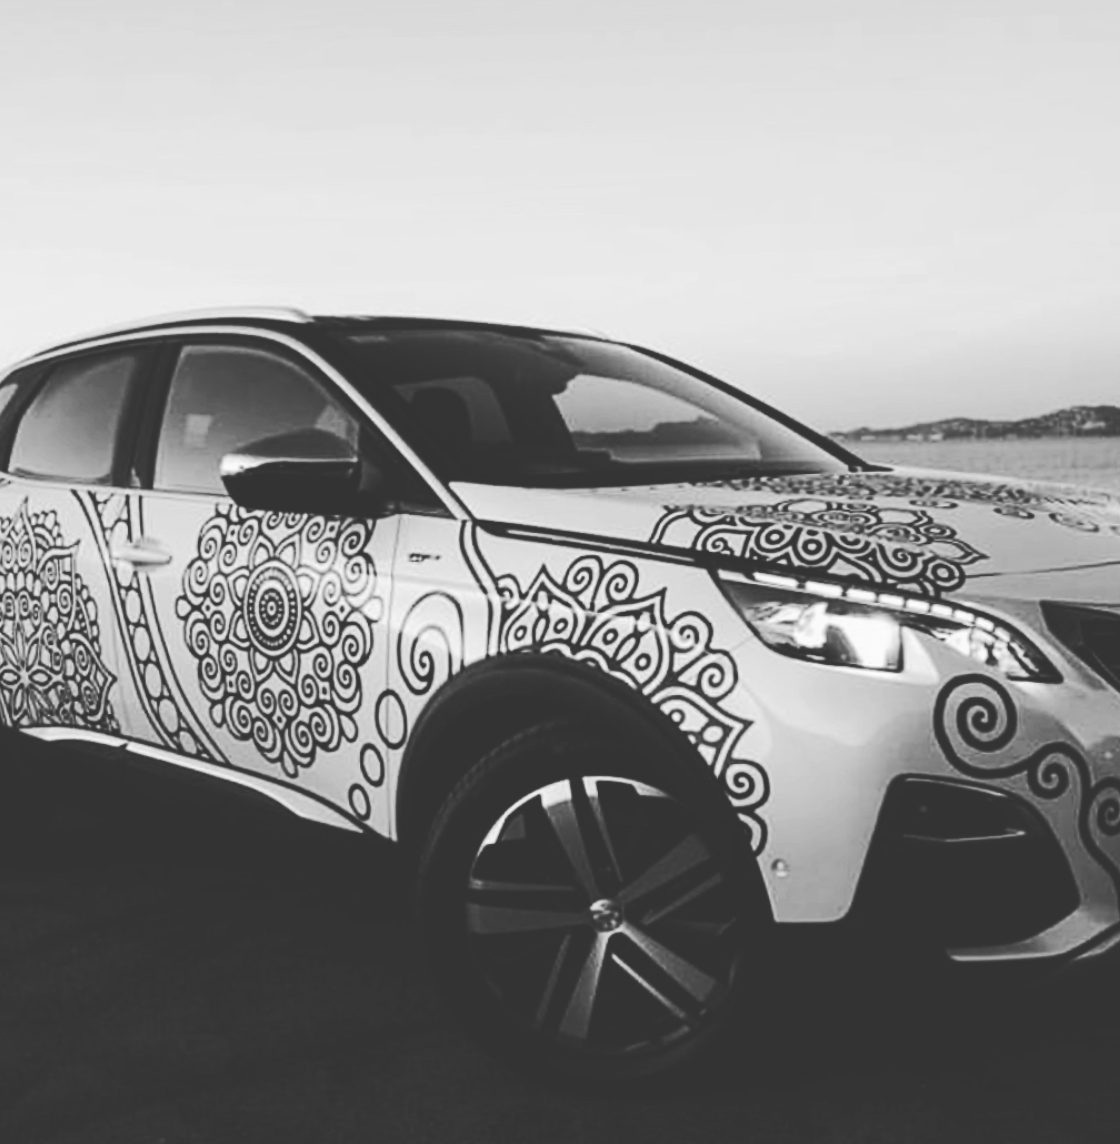 fortyonehundred X Peugeot collaboration